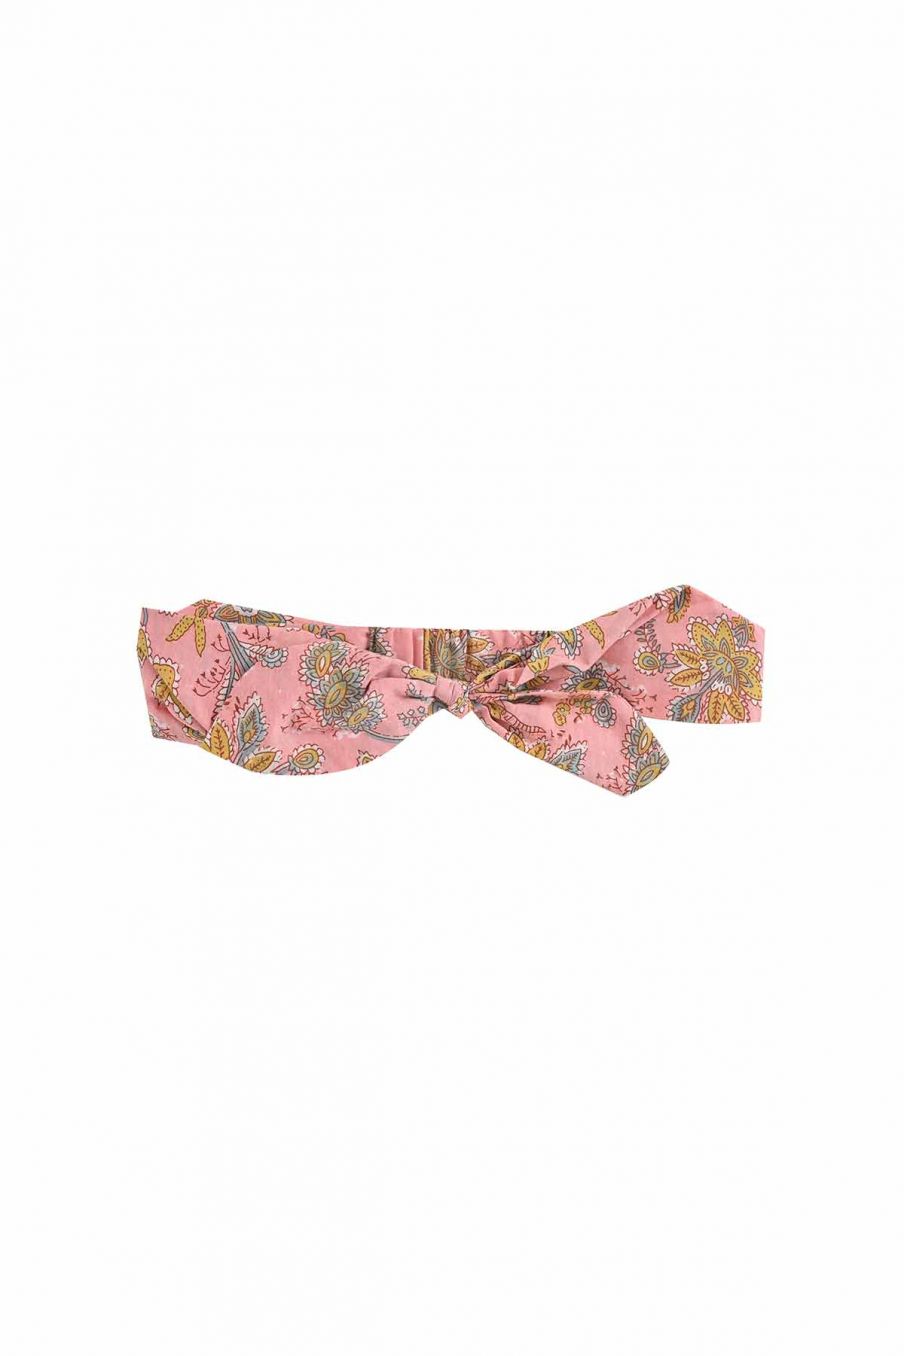 bebe-fille-bandeau-cally-pink-riviera